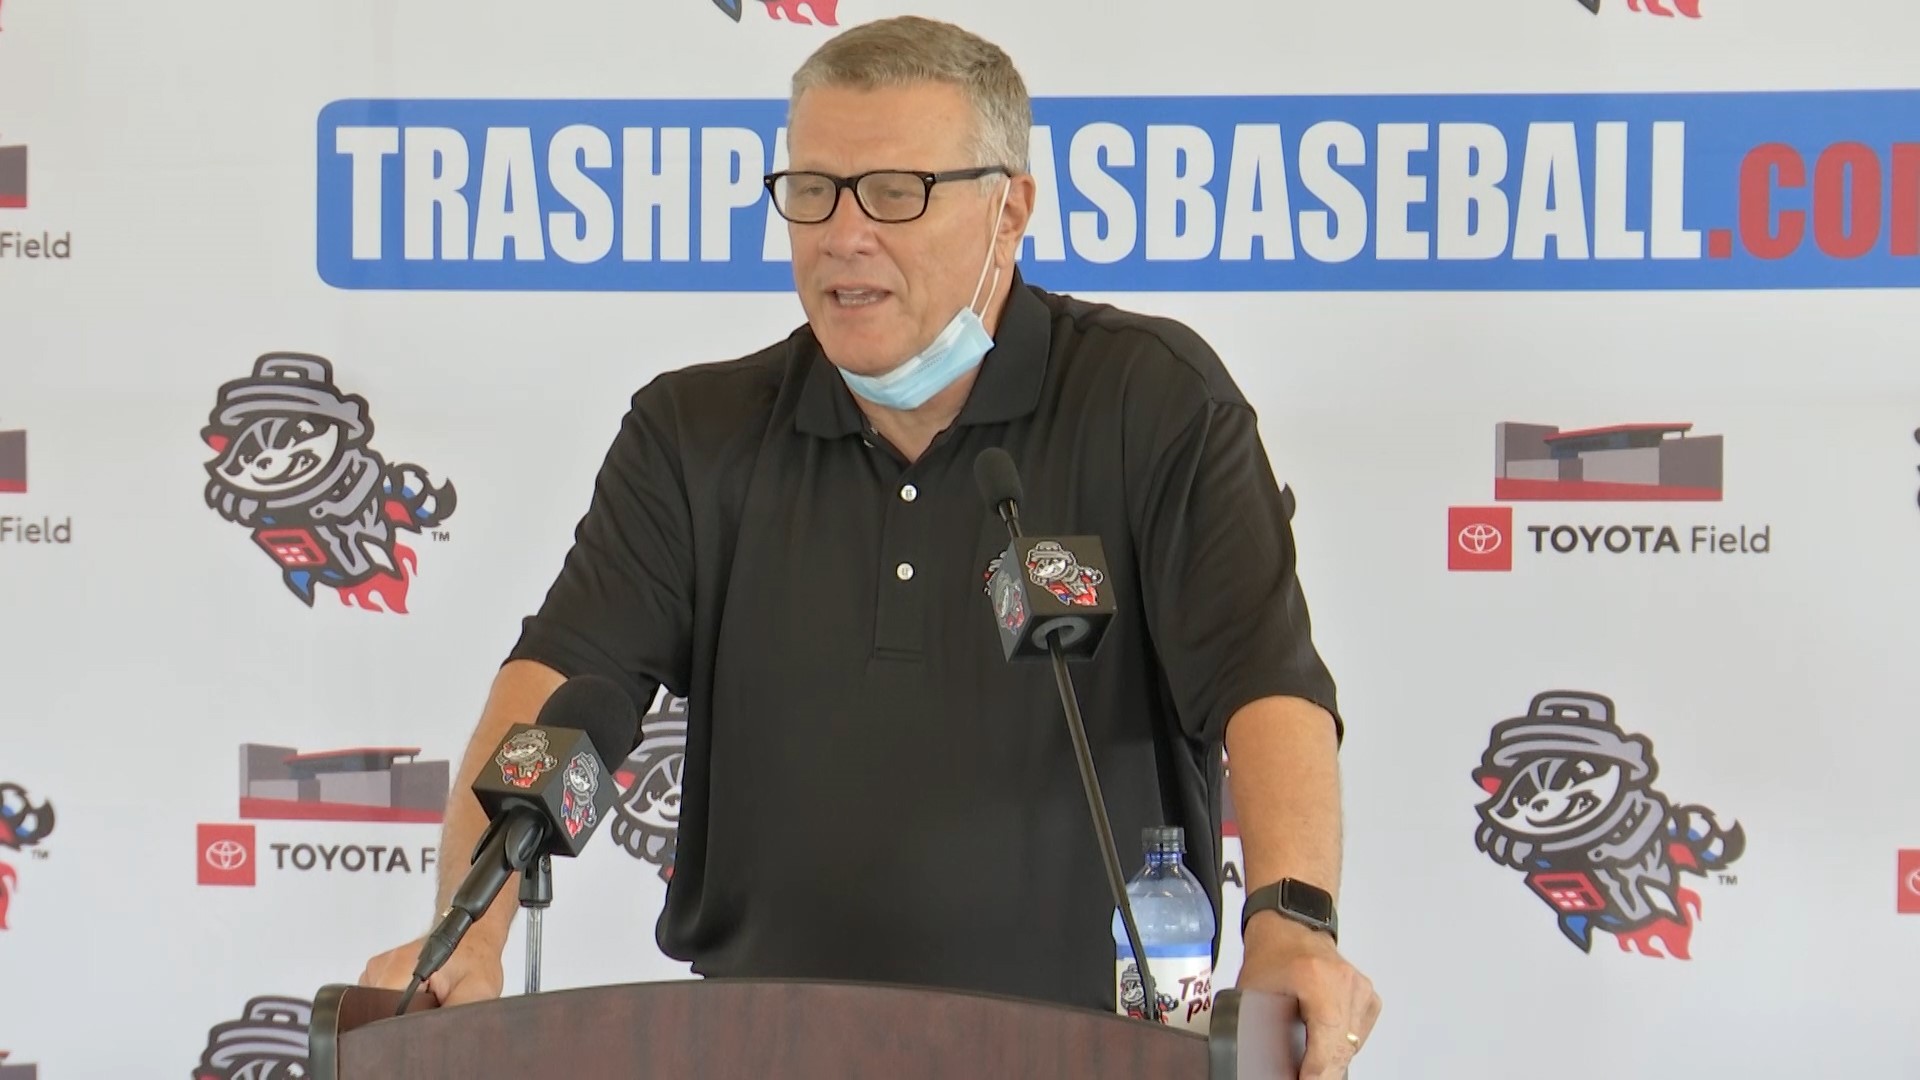 Tuesday, the President of Minor League Baseball announced that the 2020 has been canceled. That means the Trash Pandas will make their official debut in 2021